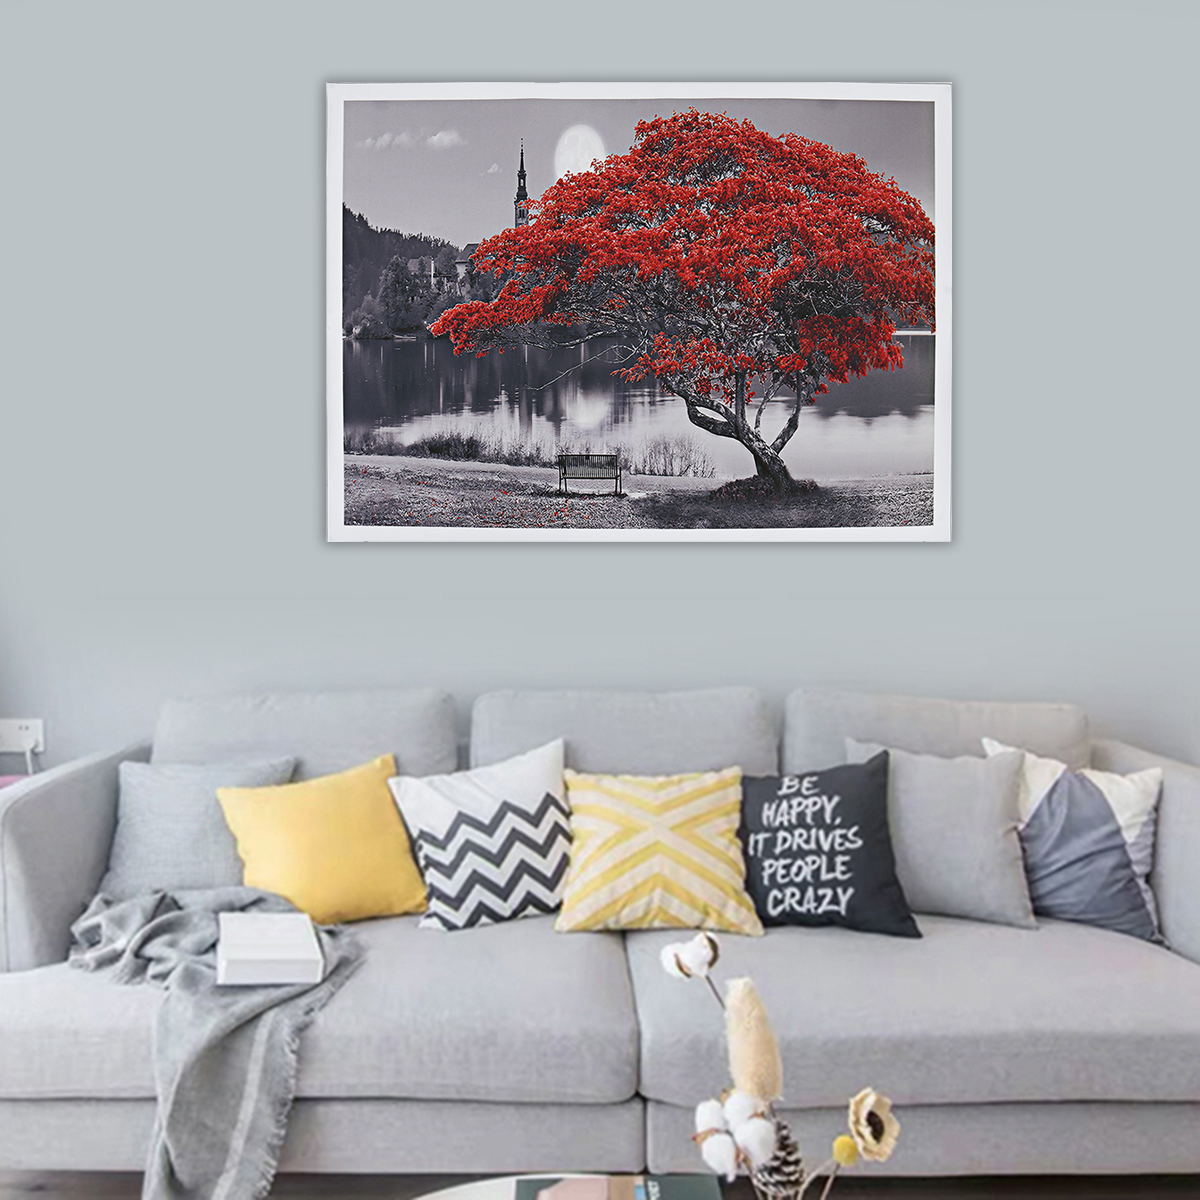 1-Piece-Big-Tree-Canvas-Painting-Wall-Decorative-Print-Art-Picture-Unframed-Wall-Hanging-Home-Office-1785043-12